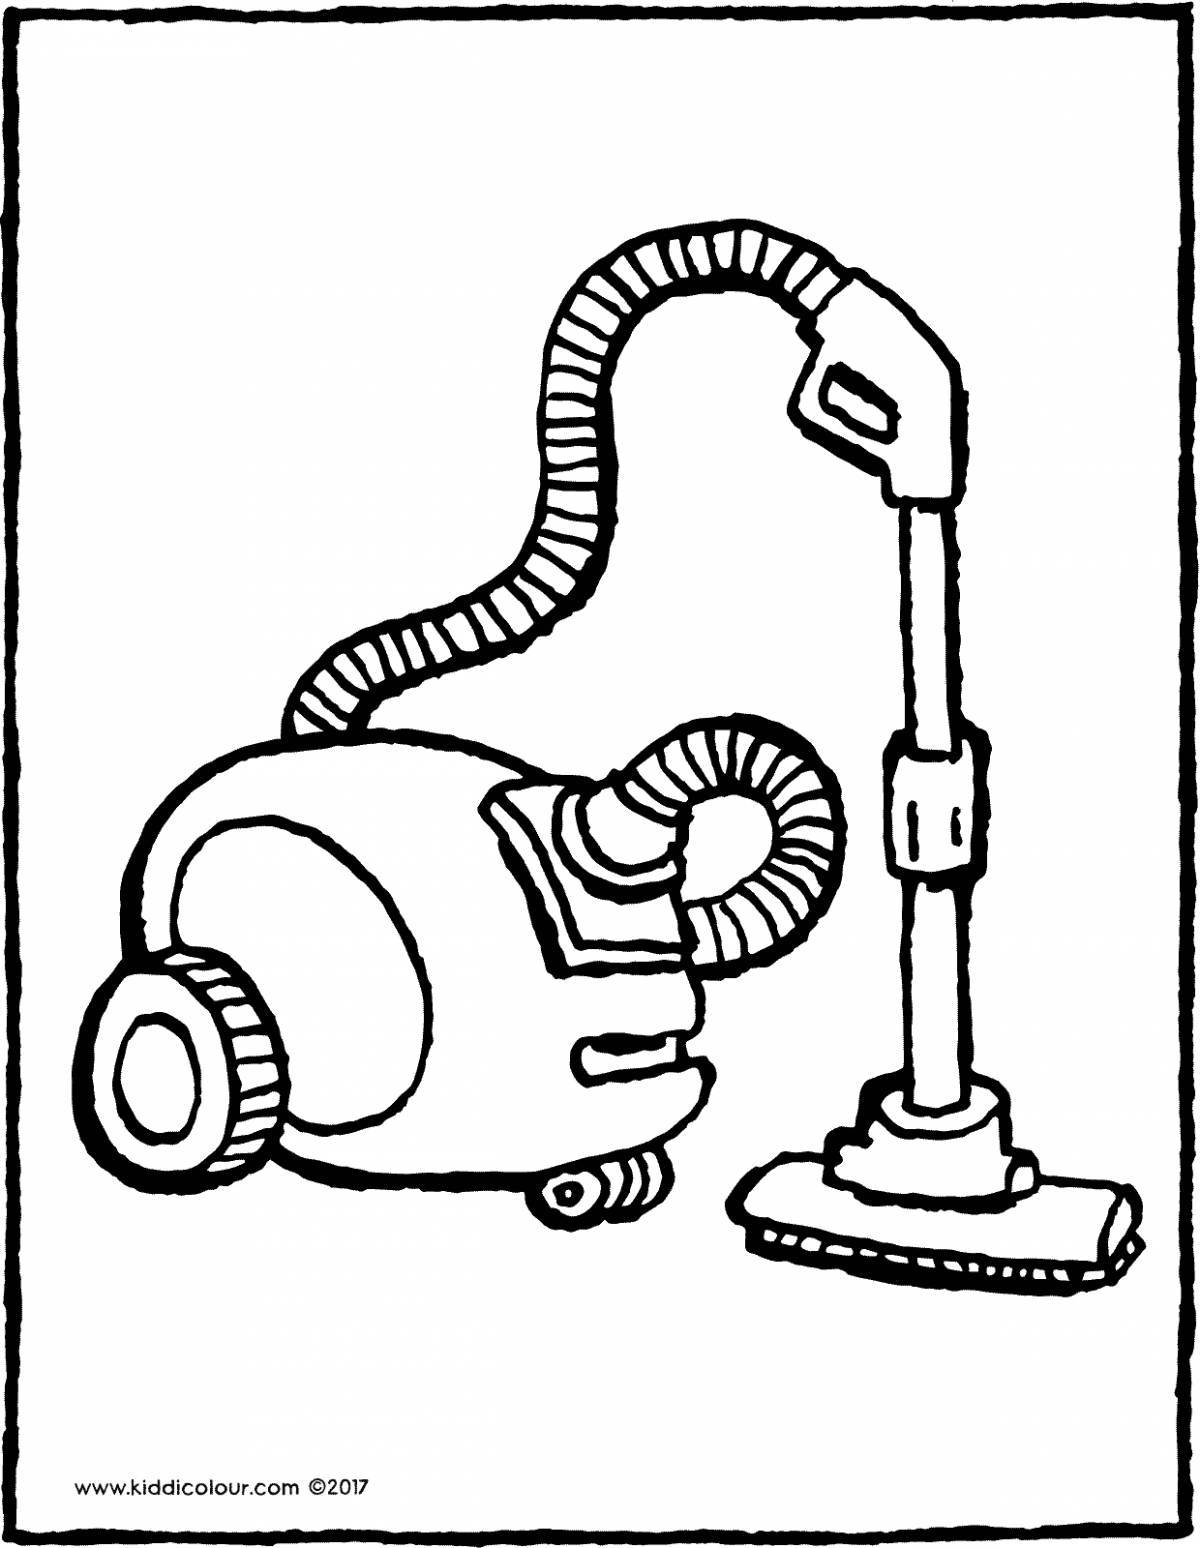 Coloring for bright electrical appliances